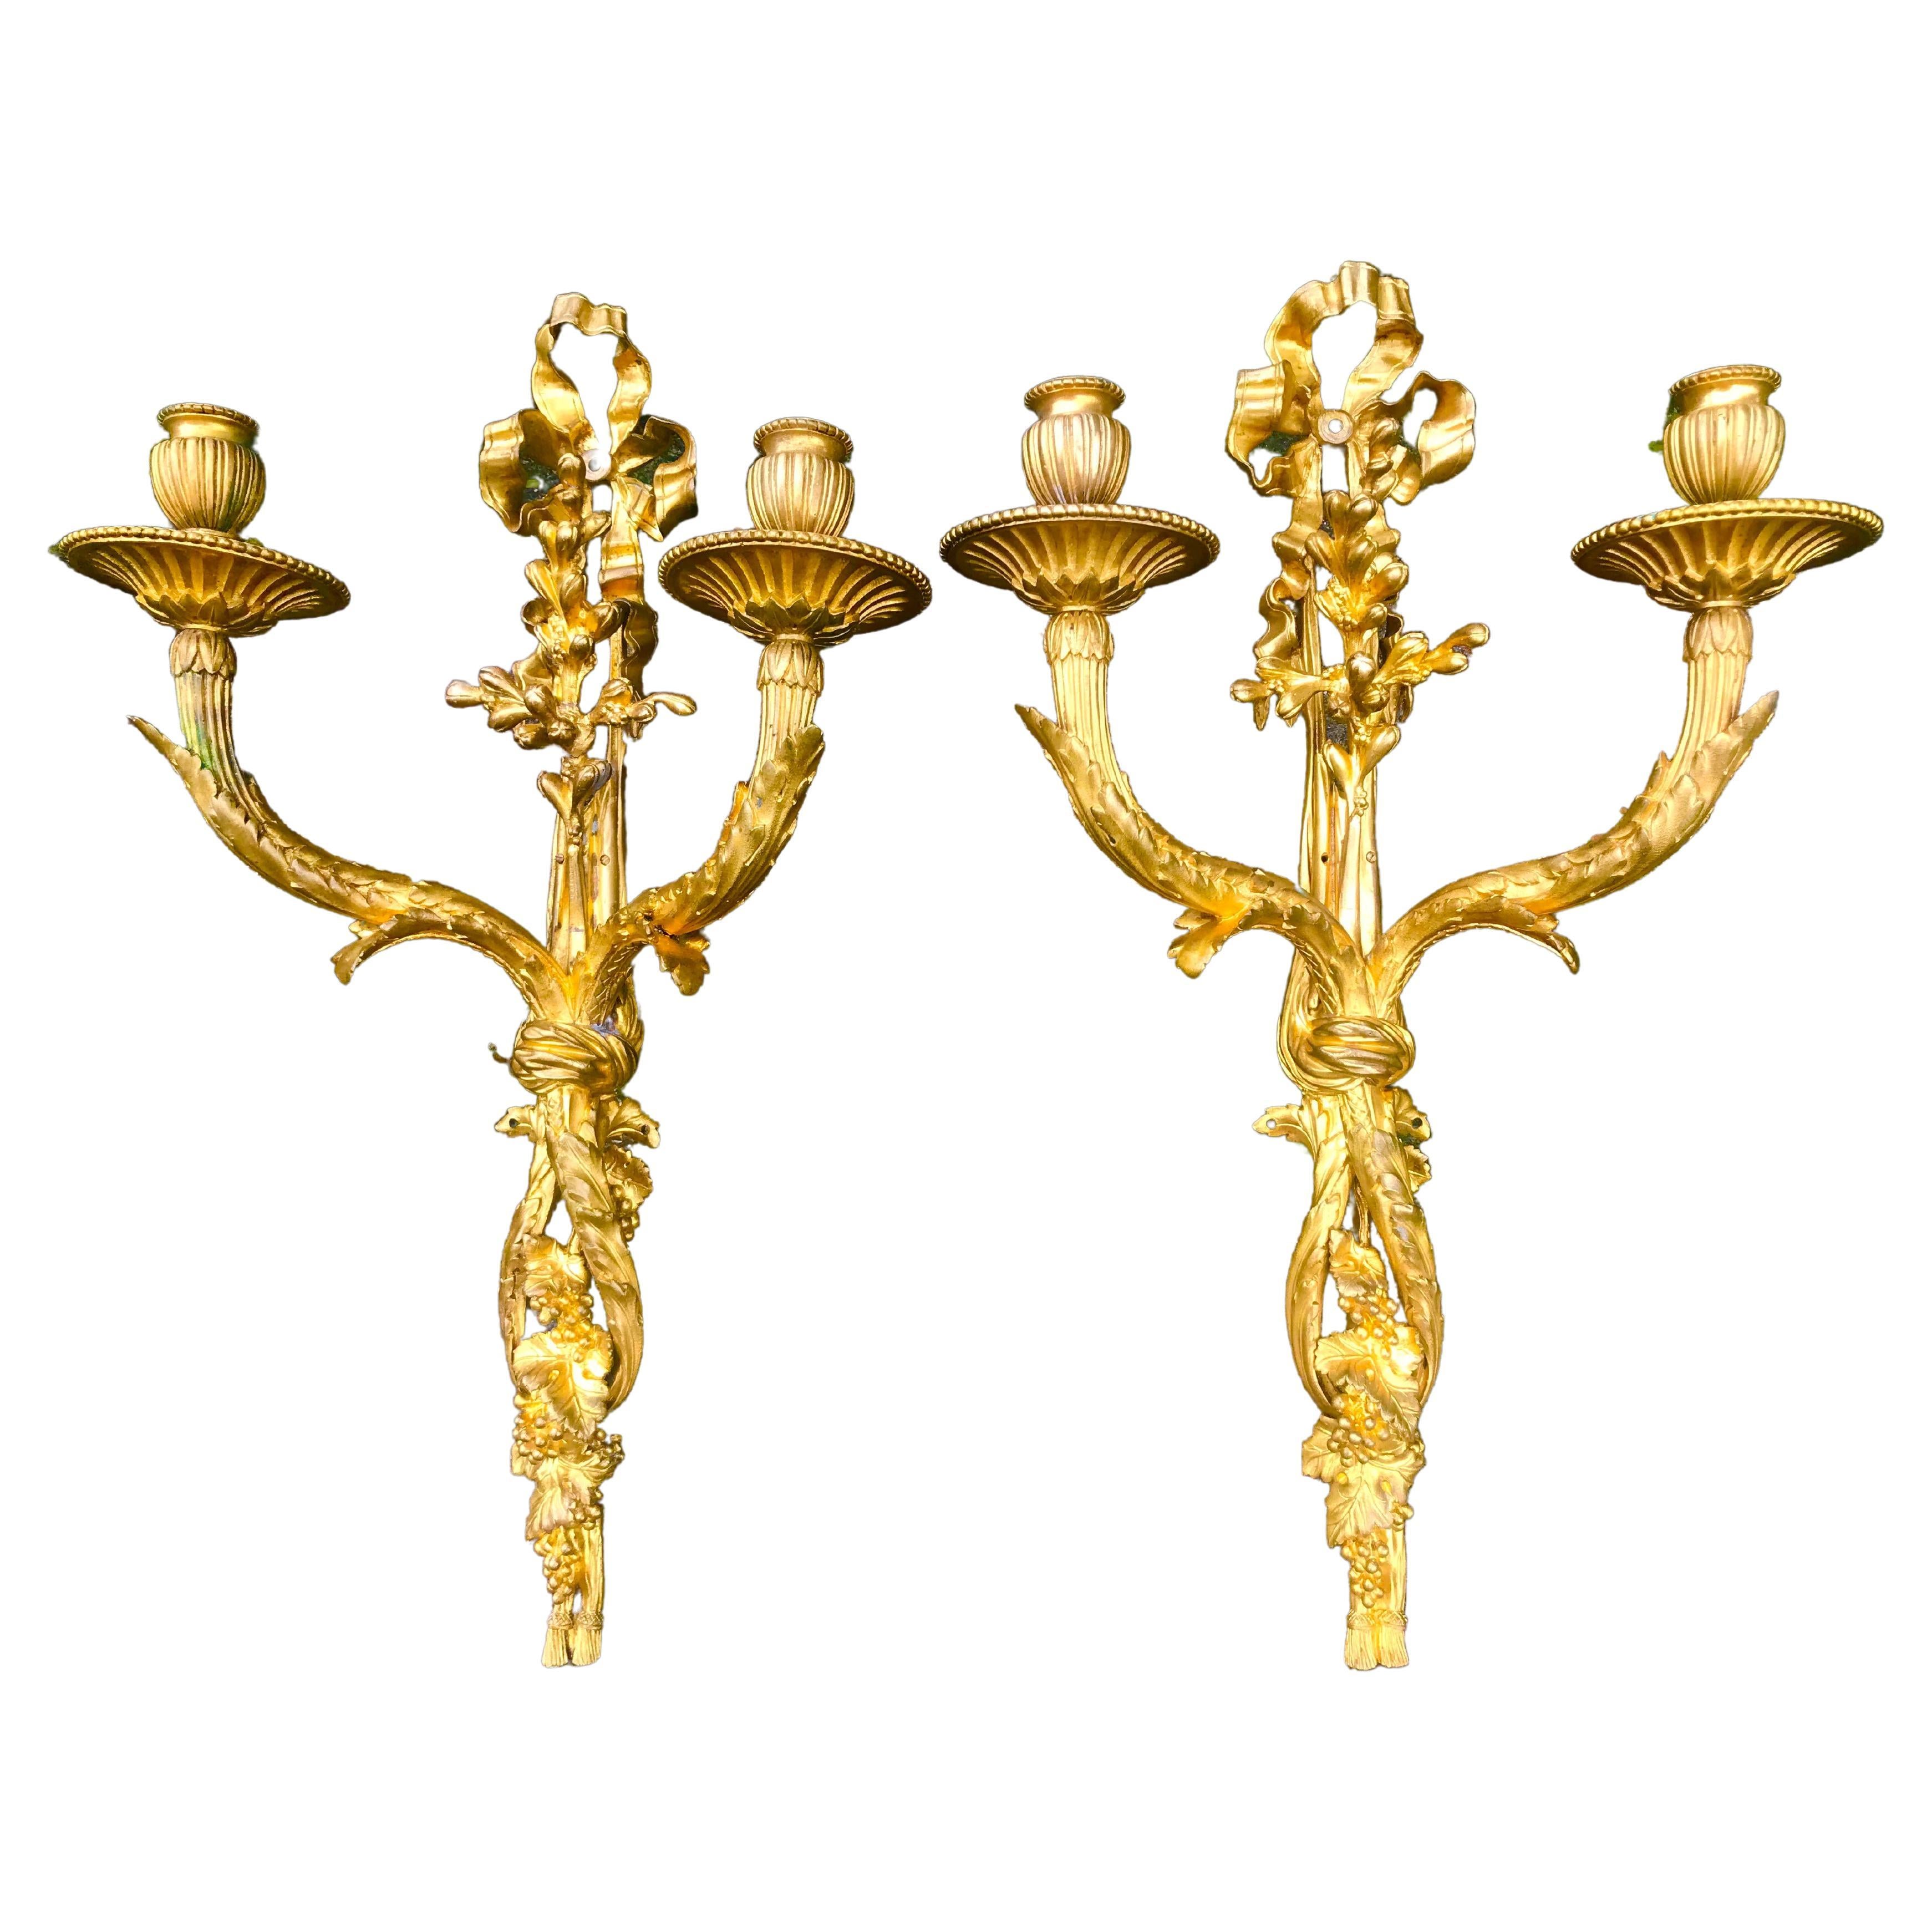 Tall Pair of Gilt Bronze Dore Louis XVI Style Wall Sconces